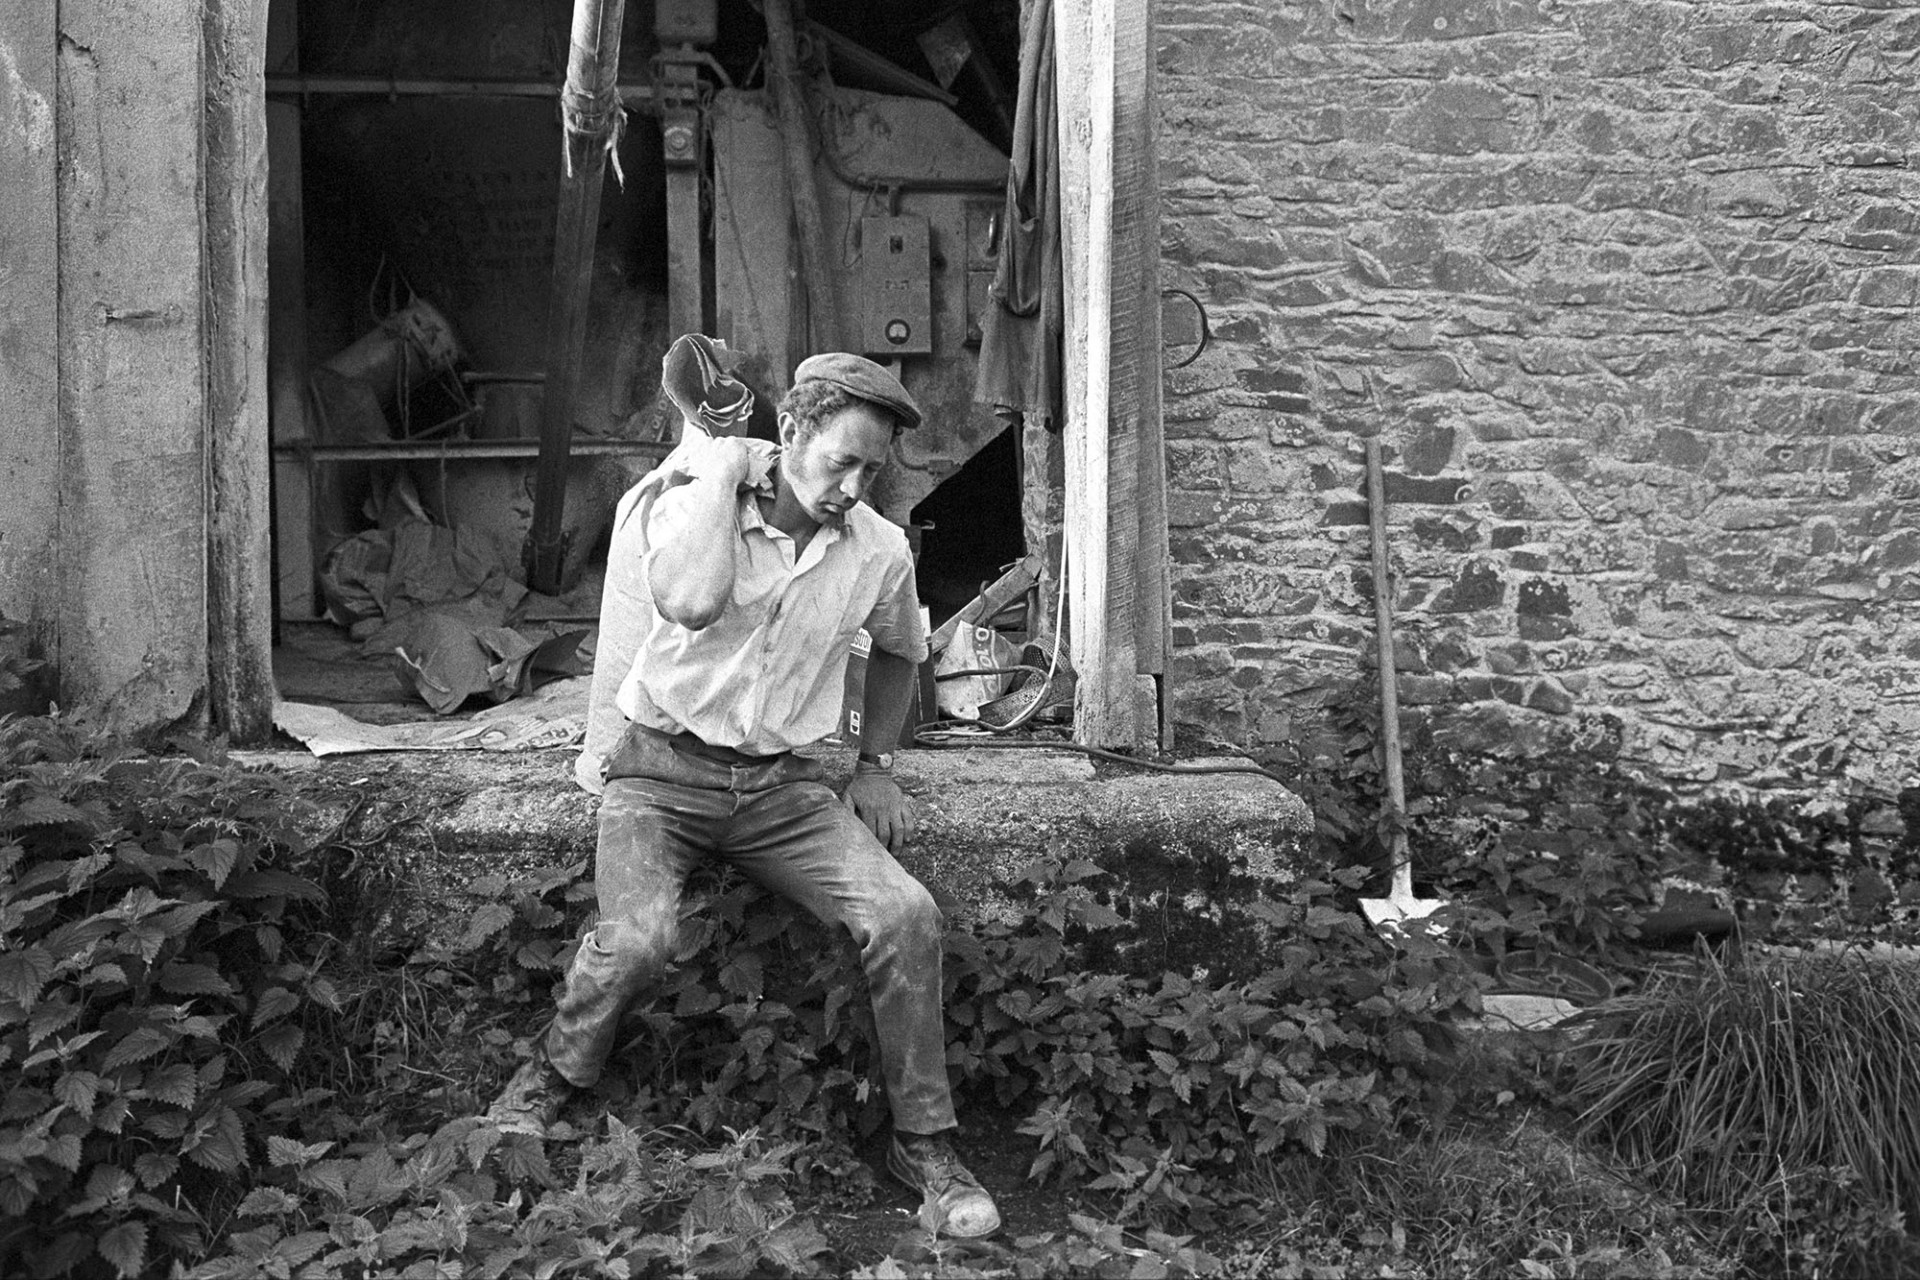 Farmer lifting sack at barn entrance.
[Mr Pengelly lifting a sack onto his back at a barn entrance at Woolleigh Barton, Beaford. The entrance is surrounded by stinging nettles and a shovel is propped up against the barn wall.]